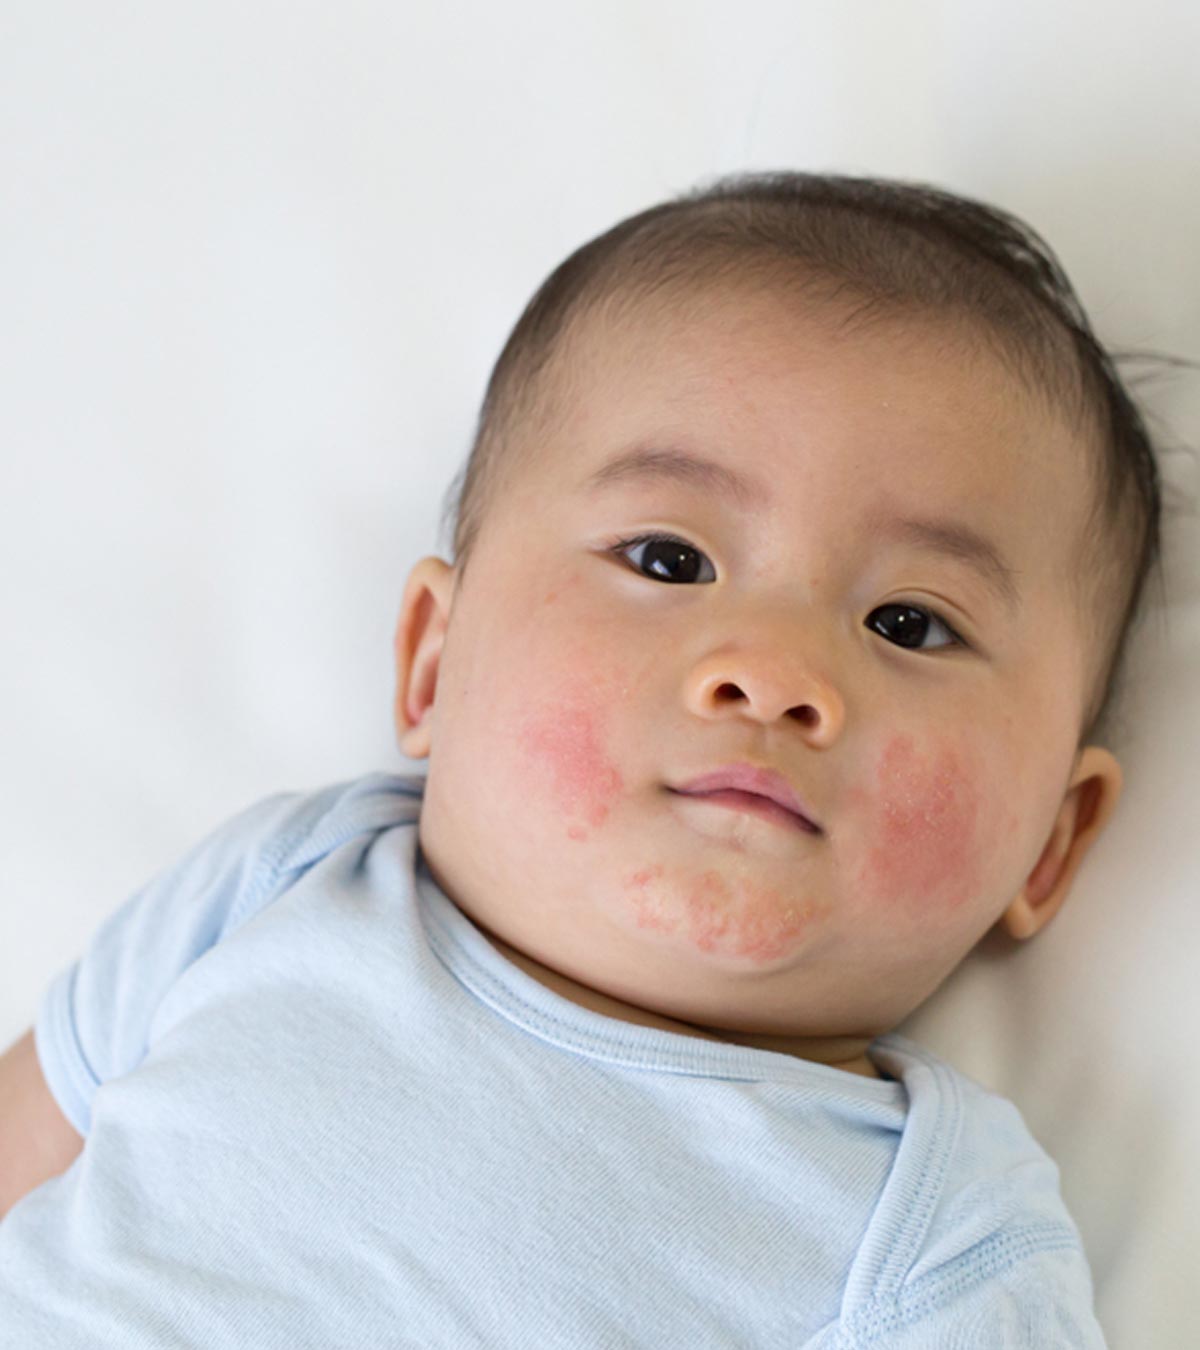 Toddler Acne: Causes, Symptoms And Treatment